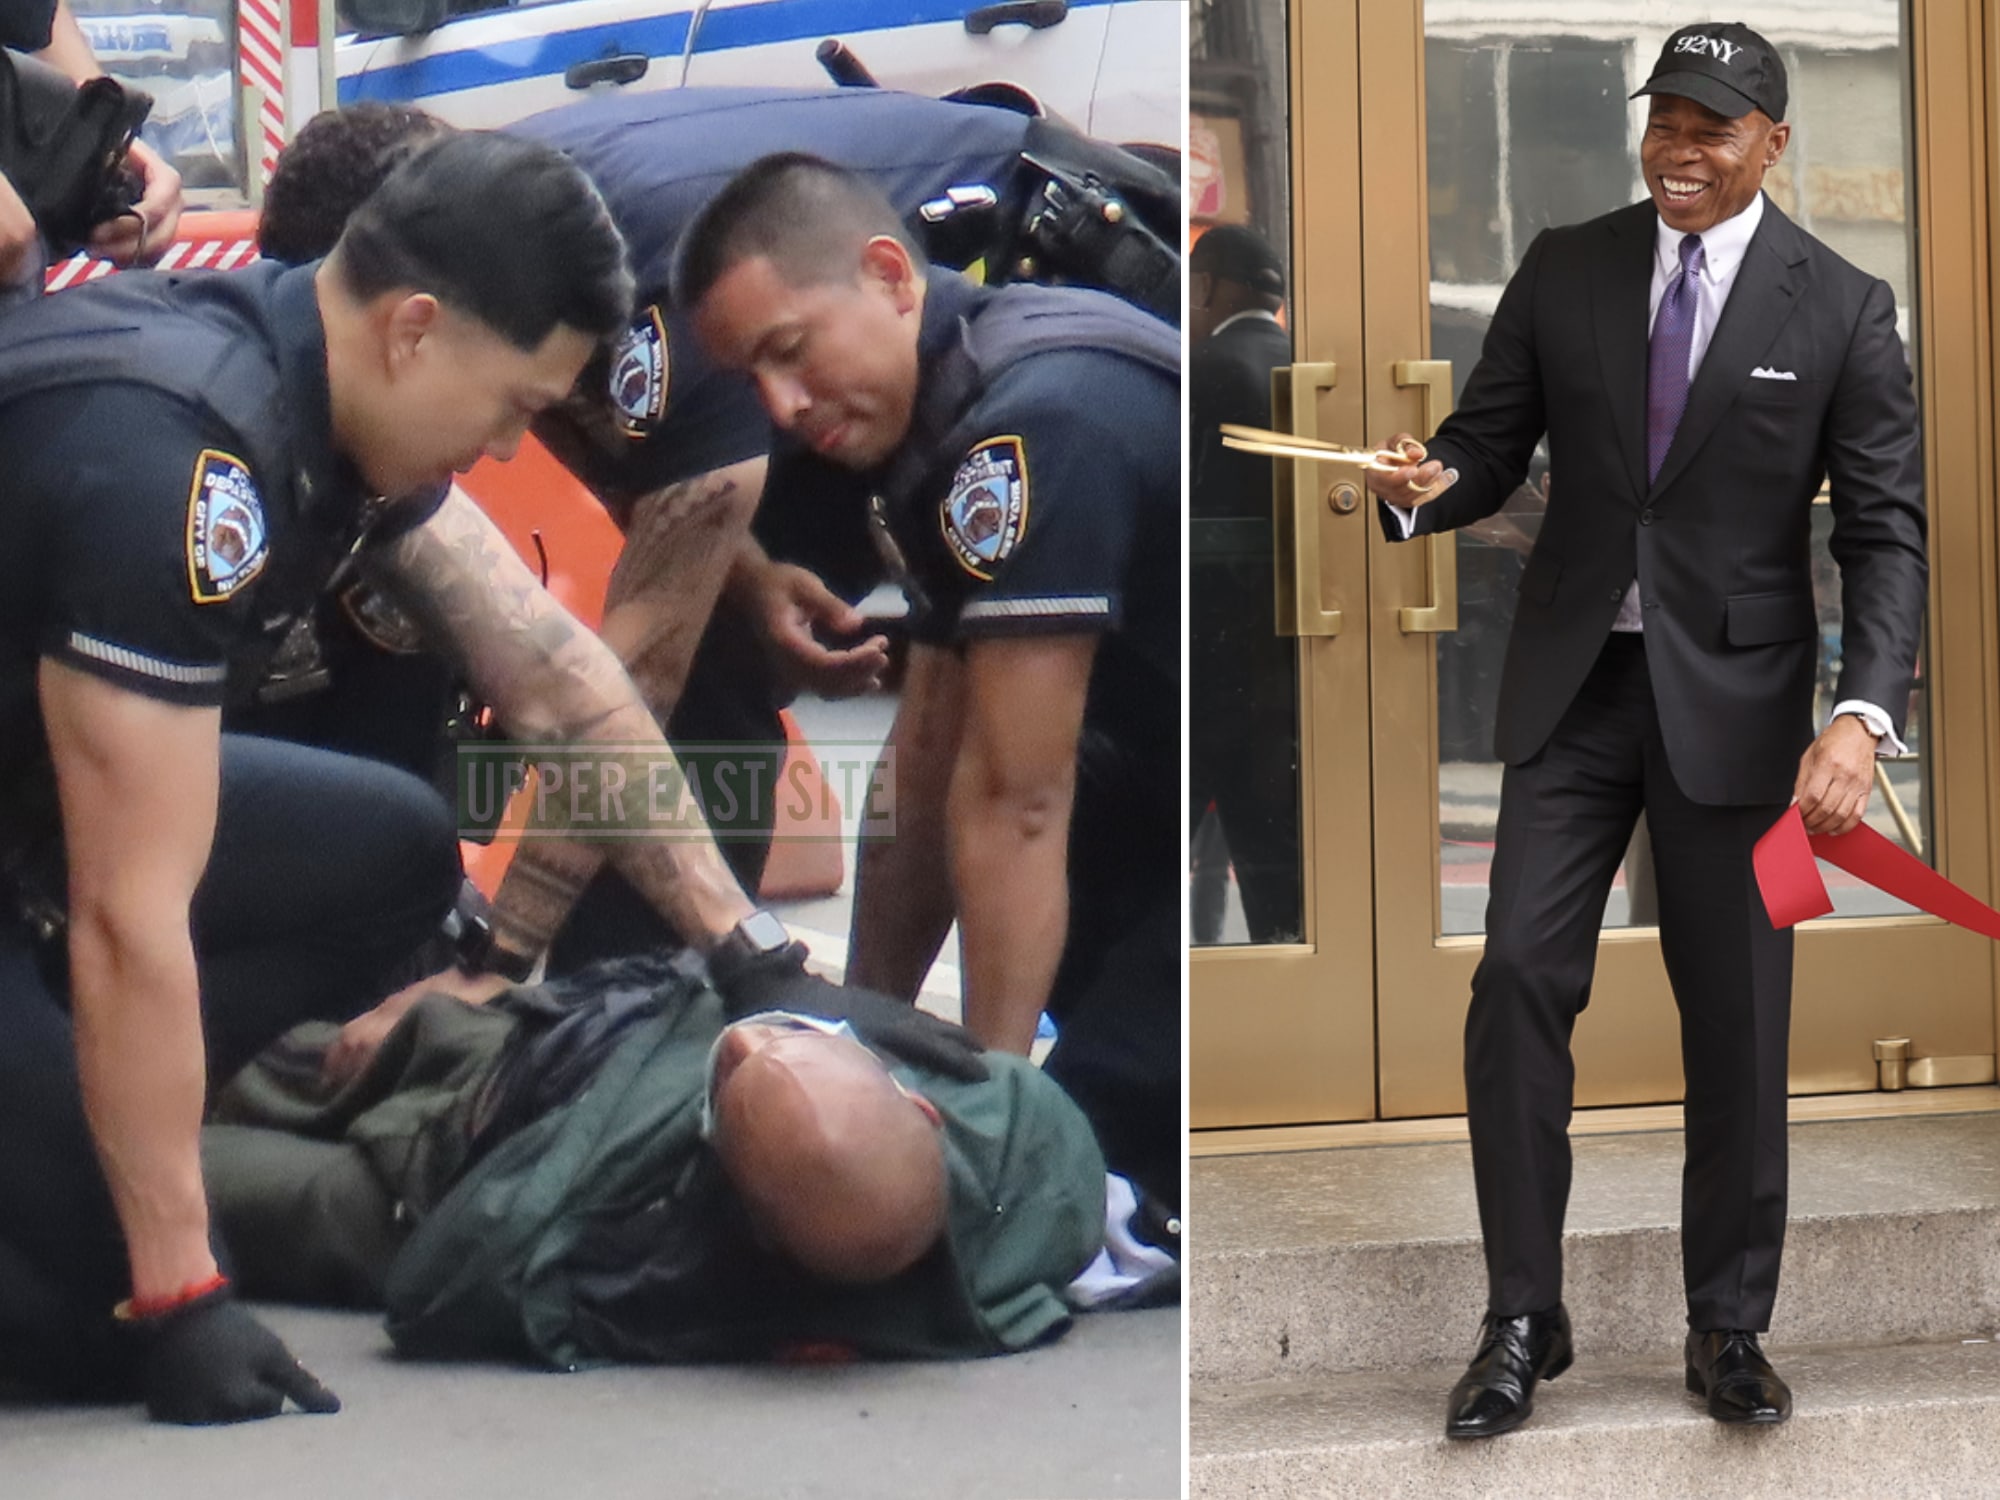 Attempted knifepoint robbery and arrest outside the 92nd Street Y days after Mayor Adams attended ribbon-cutting | Upper East Site